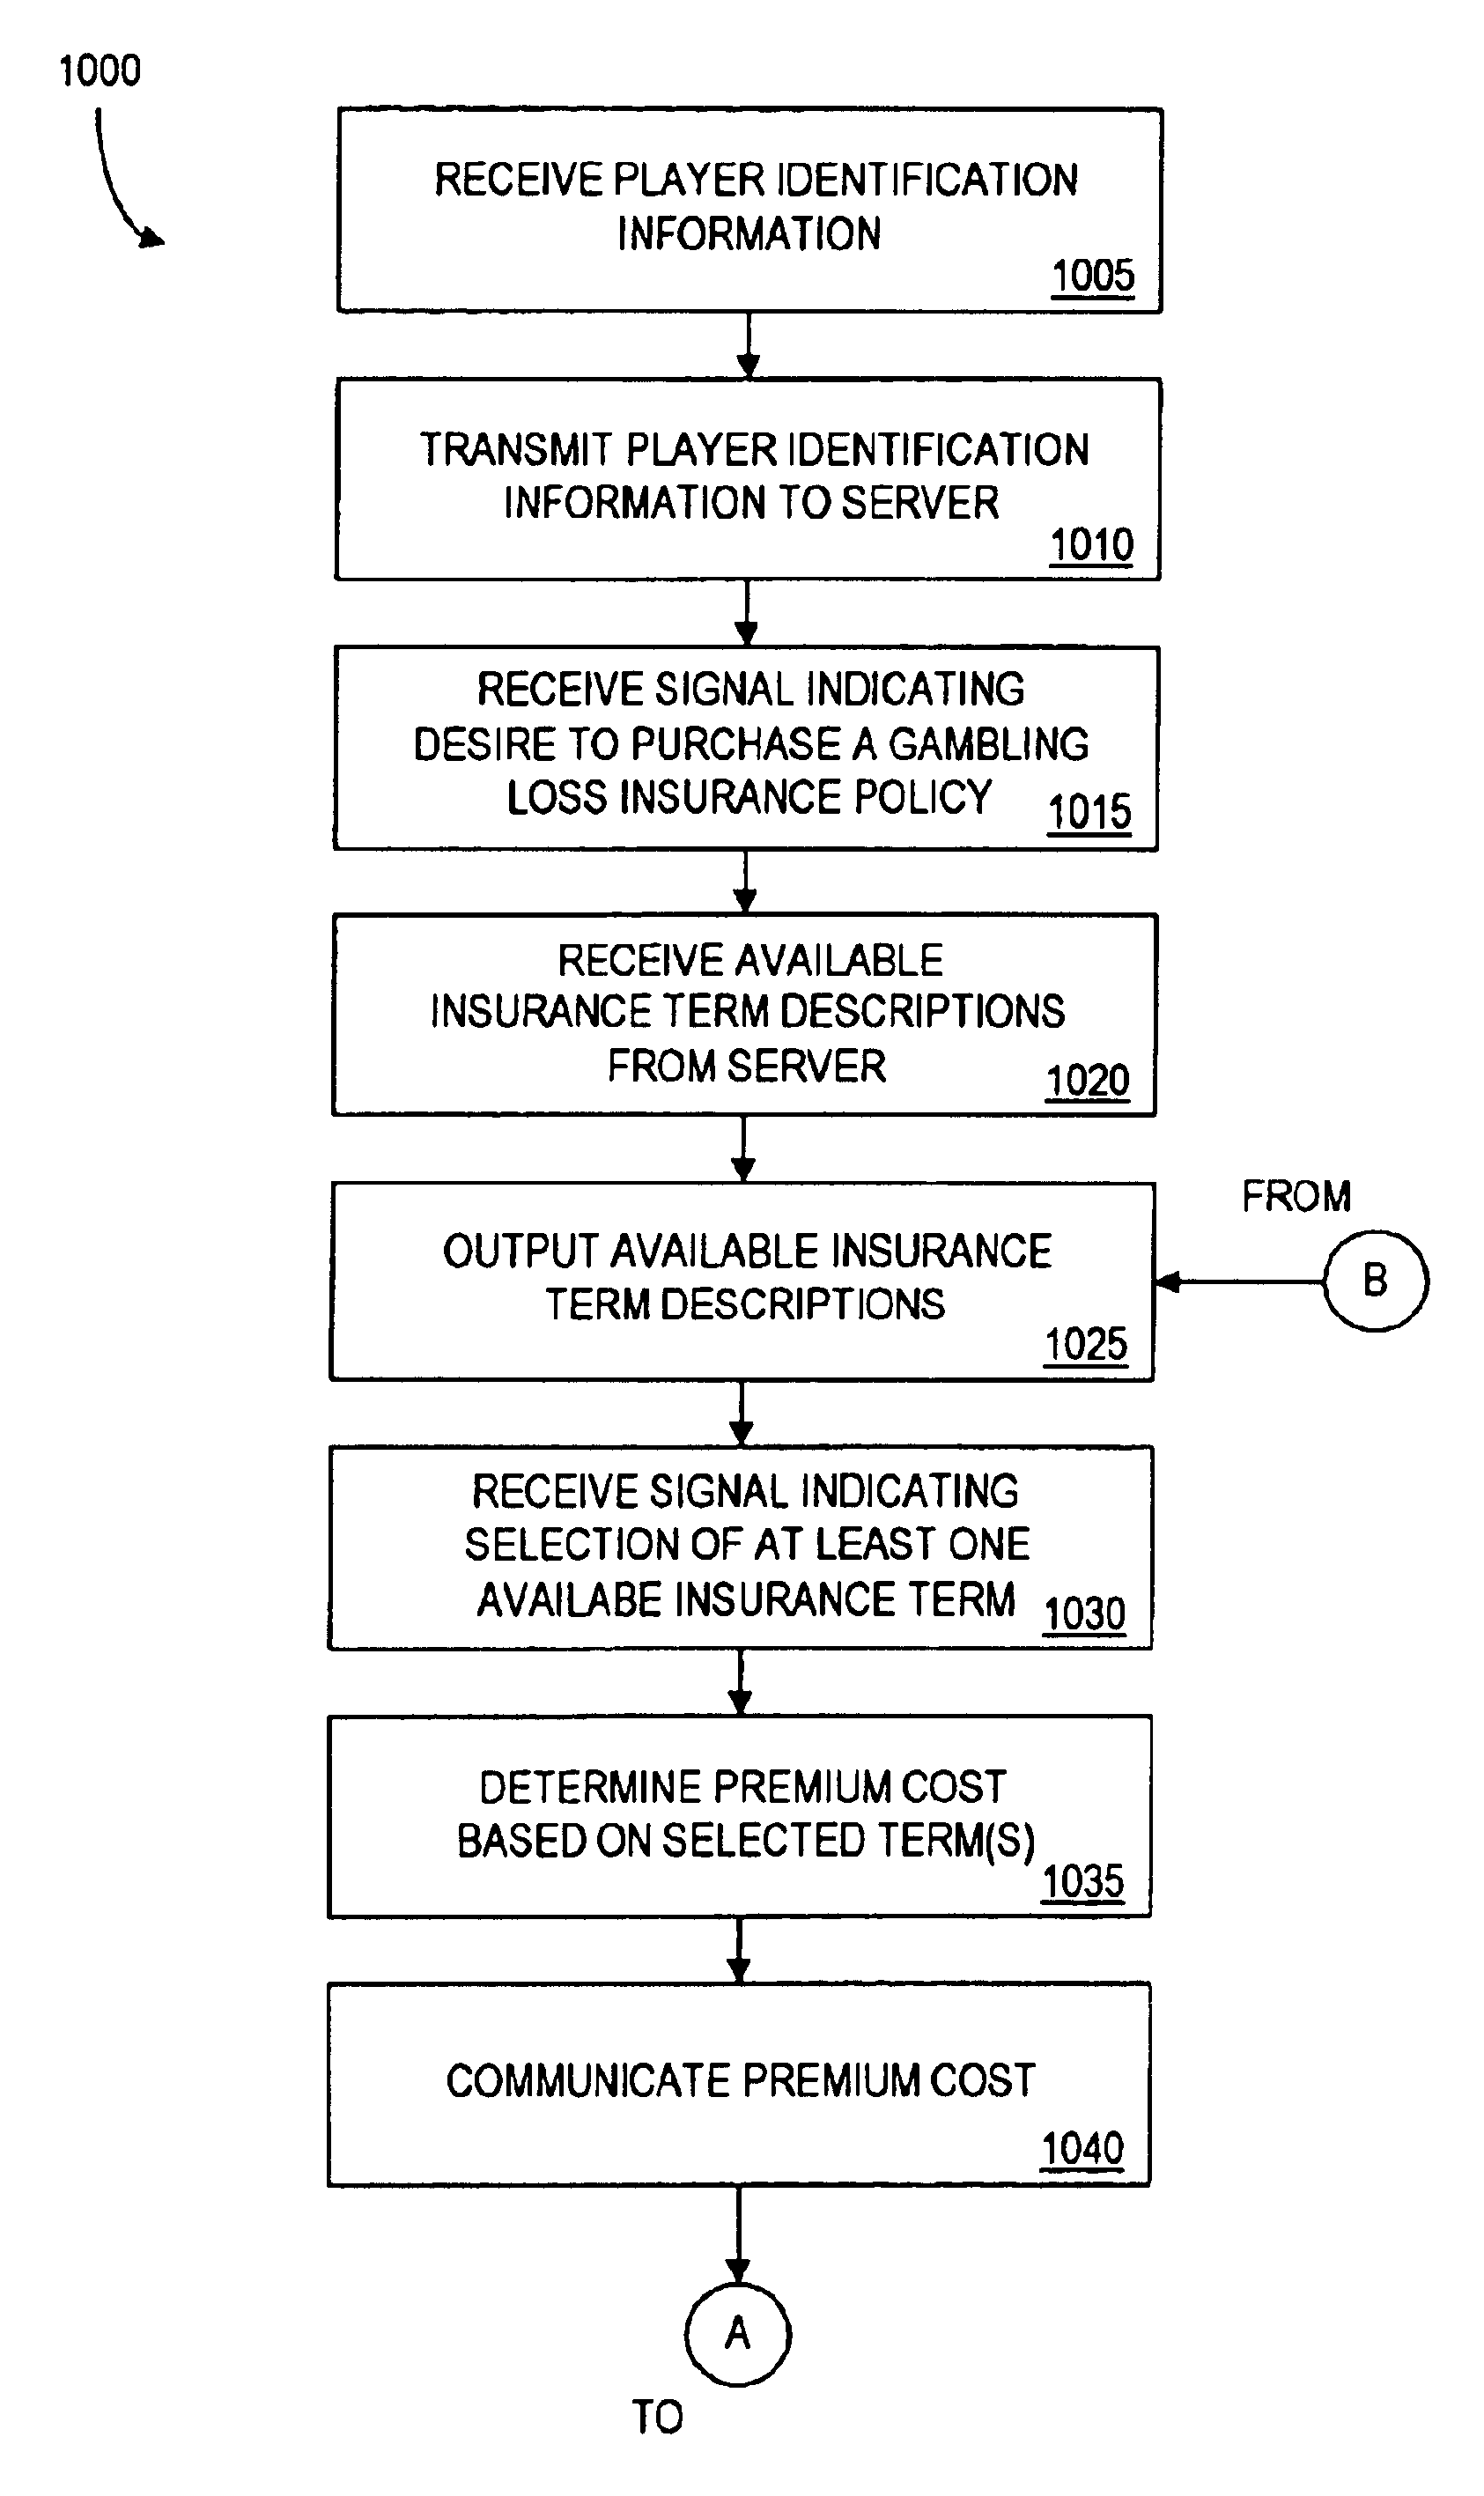 Method and apparatus for providing insurance policies for gambling losses